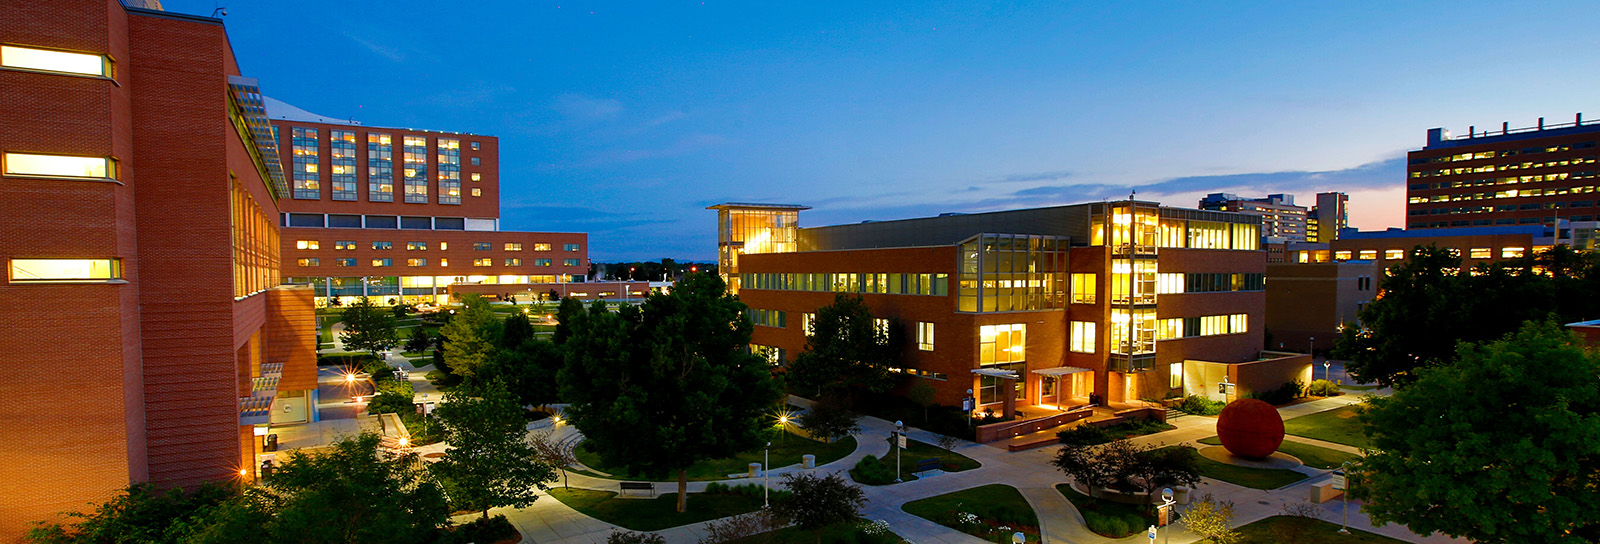 evening photo of boettcher commons